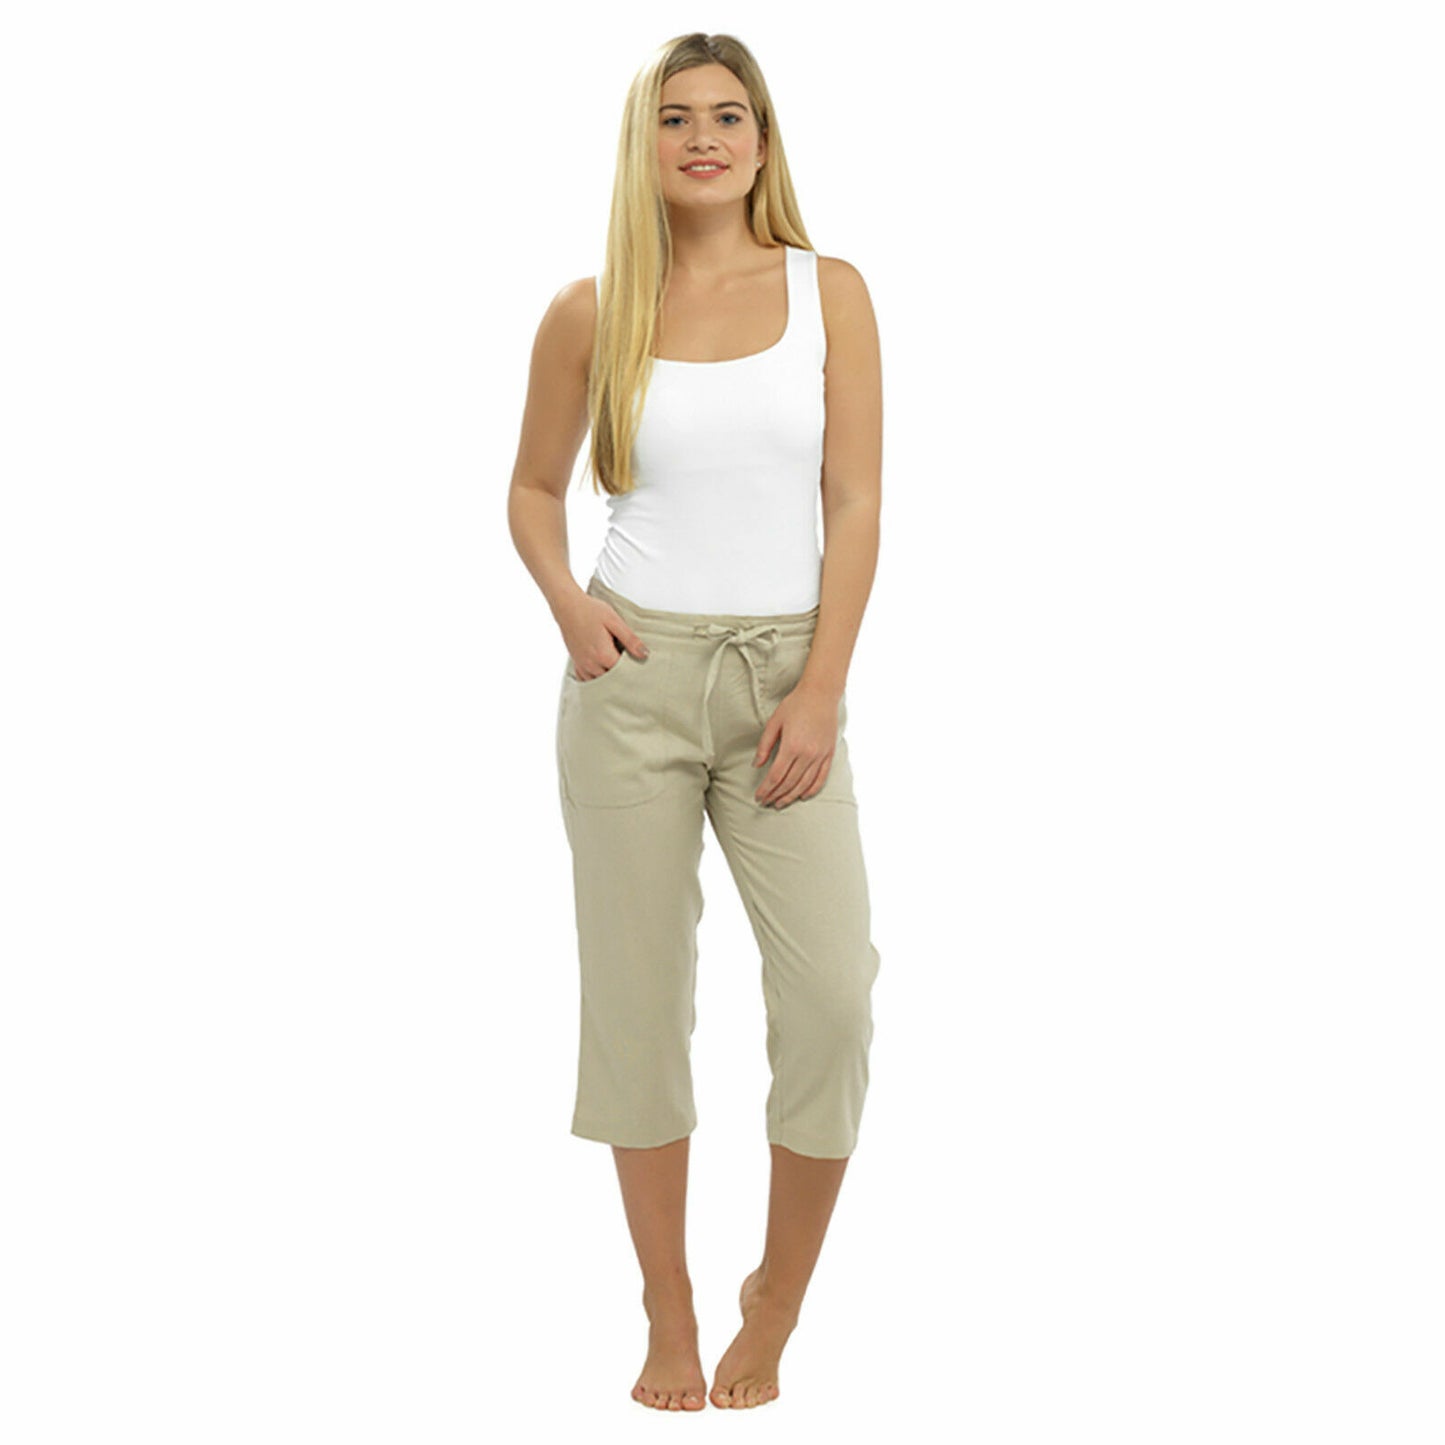 LADIES WOMEN LINEN 3 QUARTER PANTS CROPPED TROUSER 3/4 RELAXED FIT SUMMER SHORTS